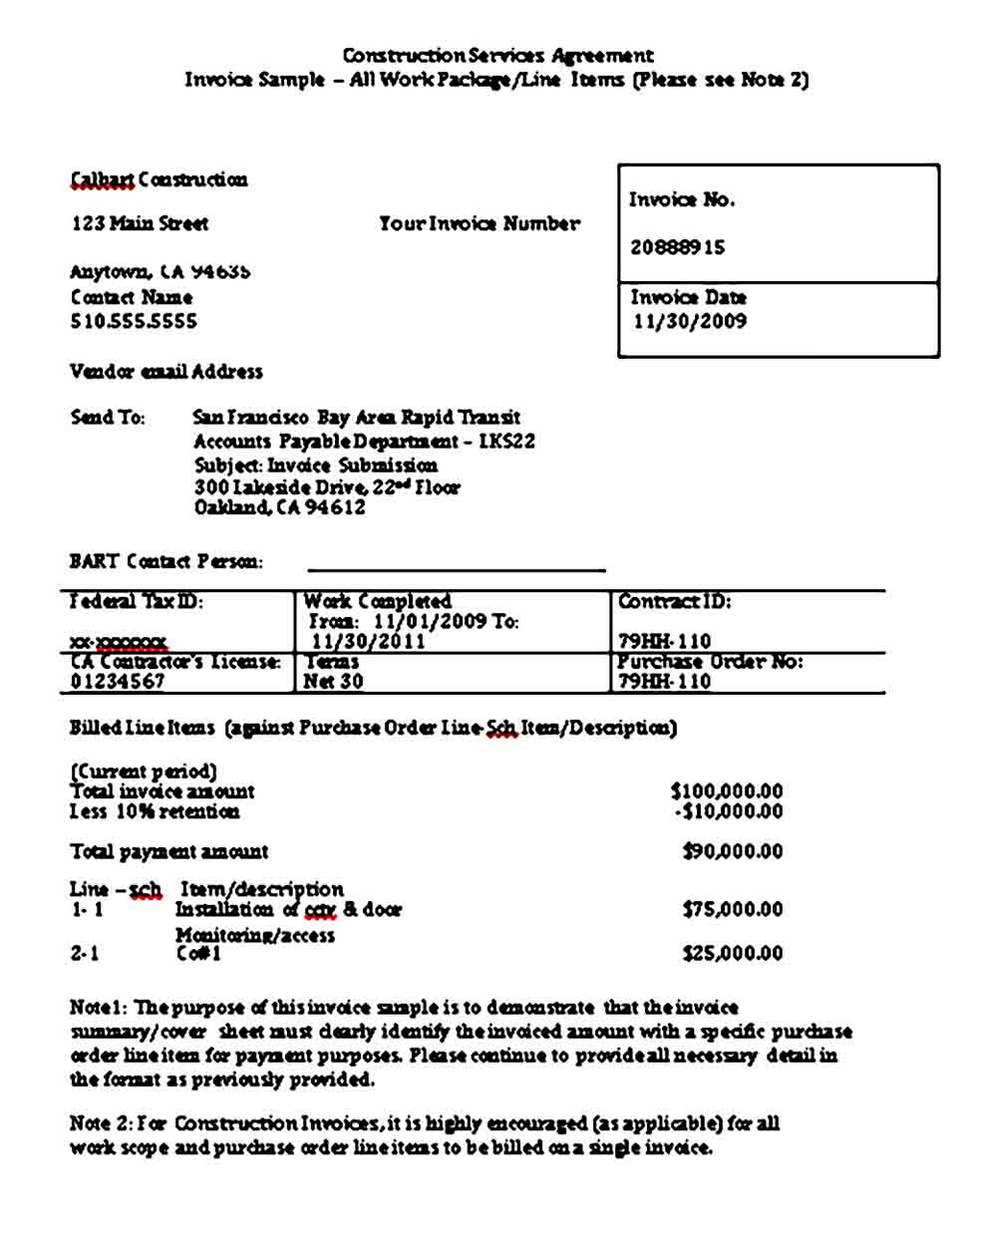 construction invoice template free